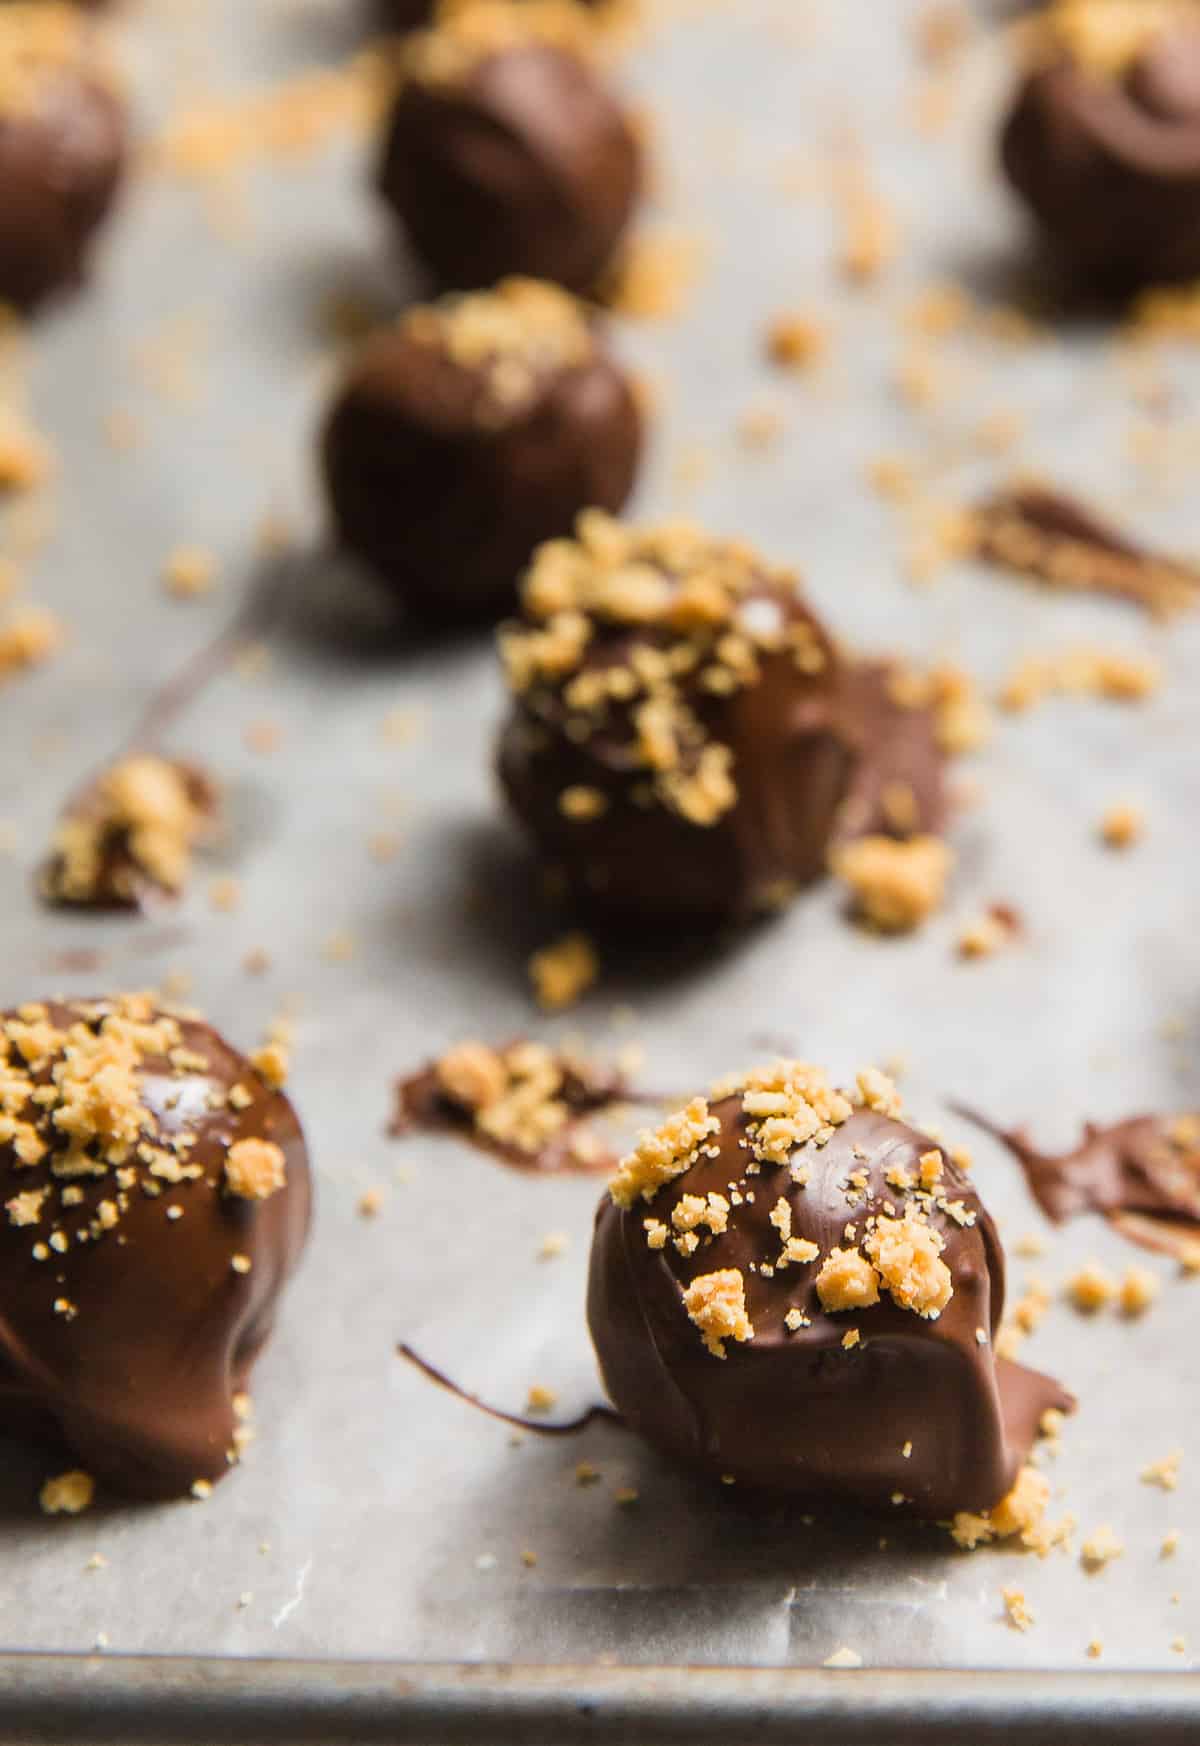 Chocolate Peanut Butter Delights, plant based, vegan, vegetarian, whole food plant based, gluten free, recipe, wfpb, healthy, healthy vegan, oil free, no refined sugar, no oil, refined sugar free, dairy free, dinner party, entertaining, dessert, sweets, treats